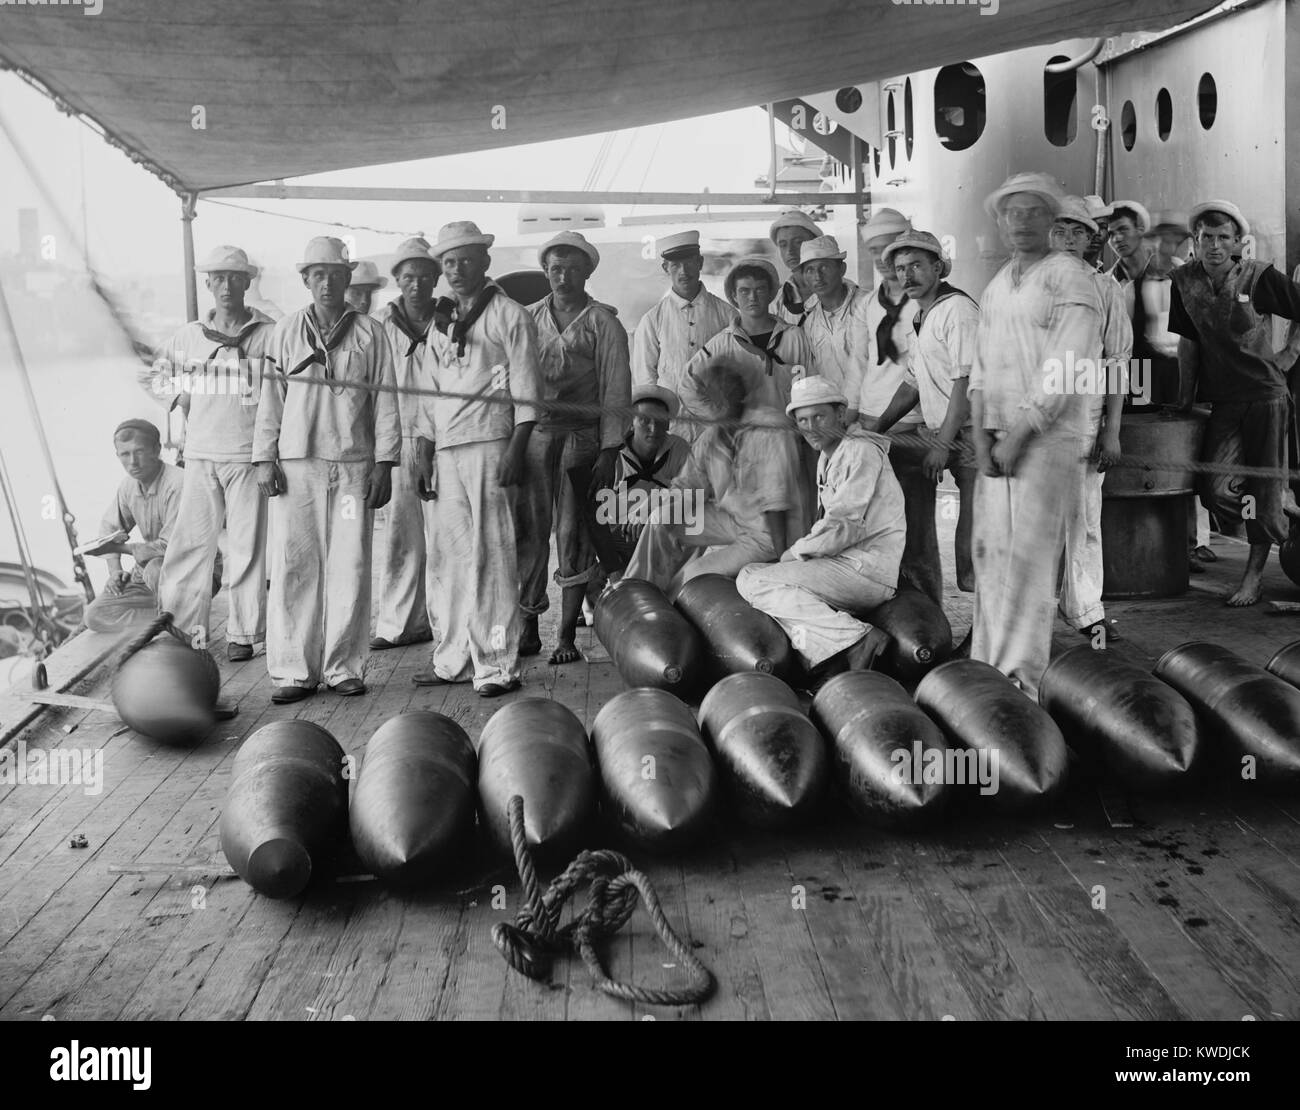 Crew of the USS Texas, posing with ammunition. During the Battle of Santiago on July 3, 1898, the battleships shelled and disabled the Spanish cruisers Vizcaya and Cristobal Colon (BSLOC 2017 10 50) Stock Photo